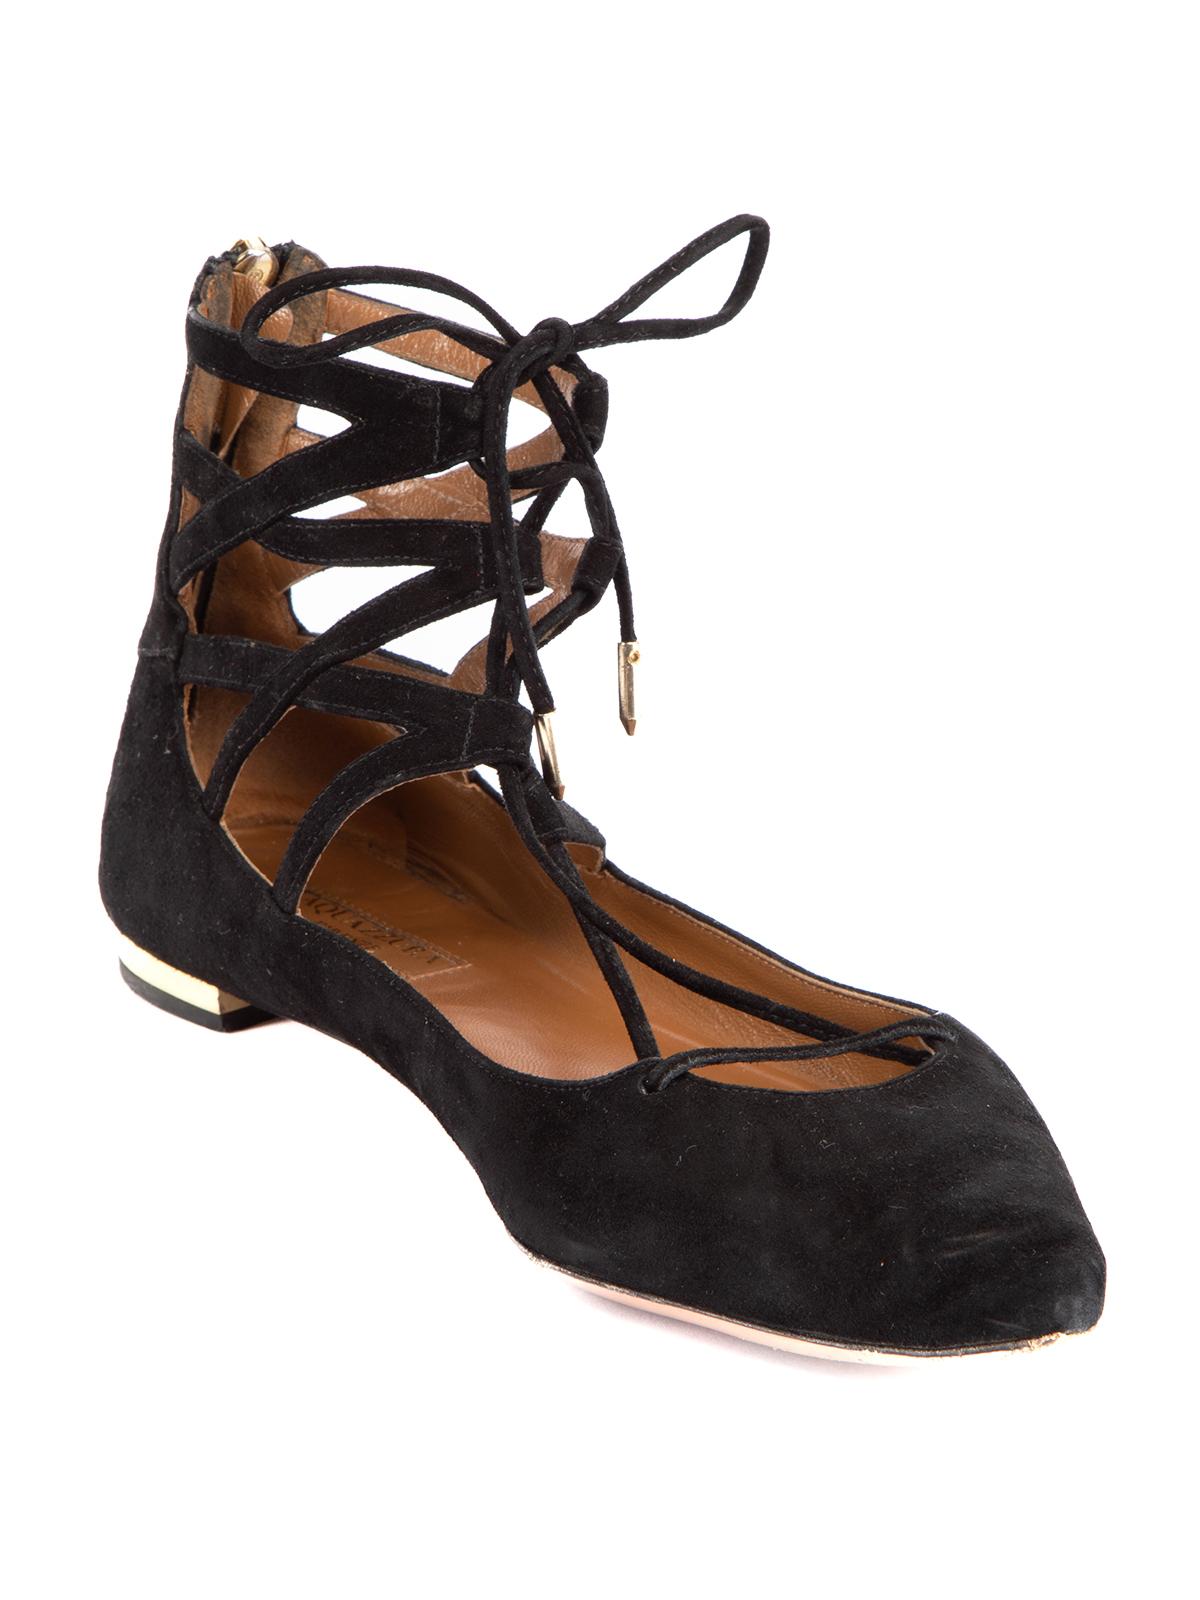 CONDITION is Good. Minor wear to flats are evident. There is general fading/marks to suede exterior, and significant wear to outsole on this used Aquazzura designer resale item.   Details  Black Suede Lace up ballet flats Point-toe  Zip at the back 